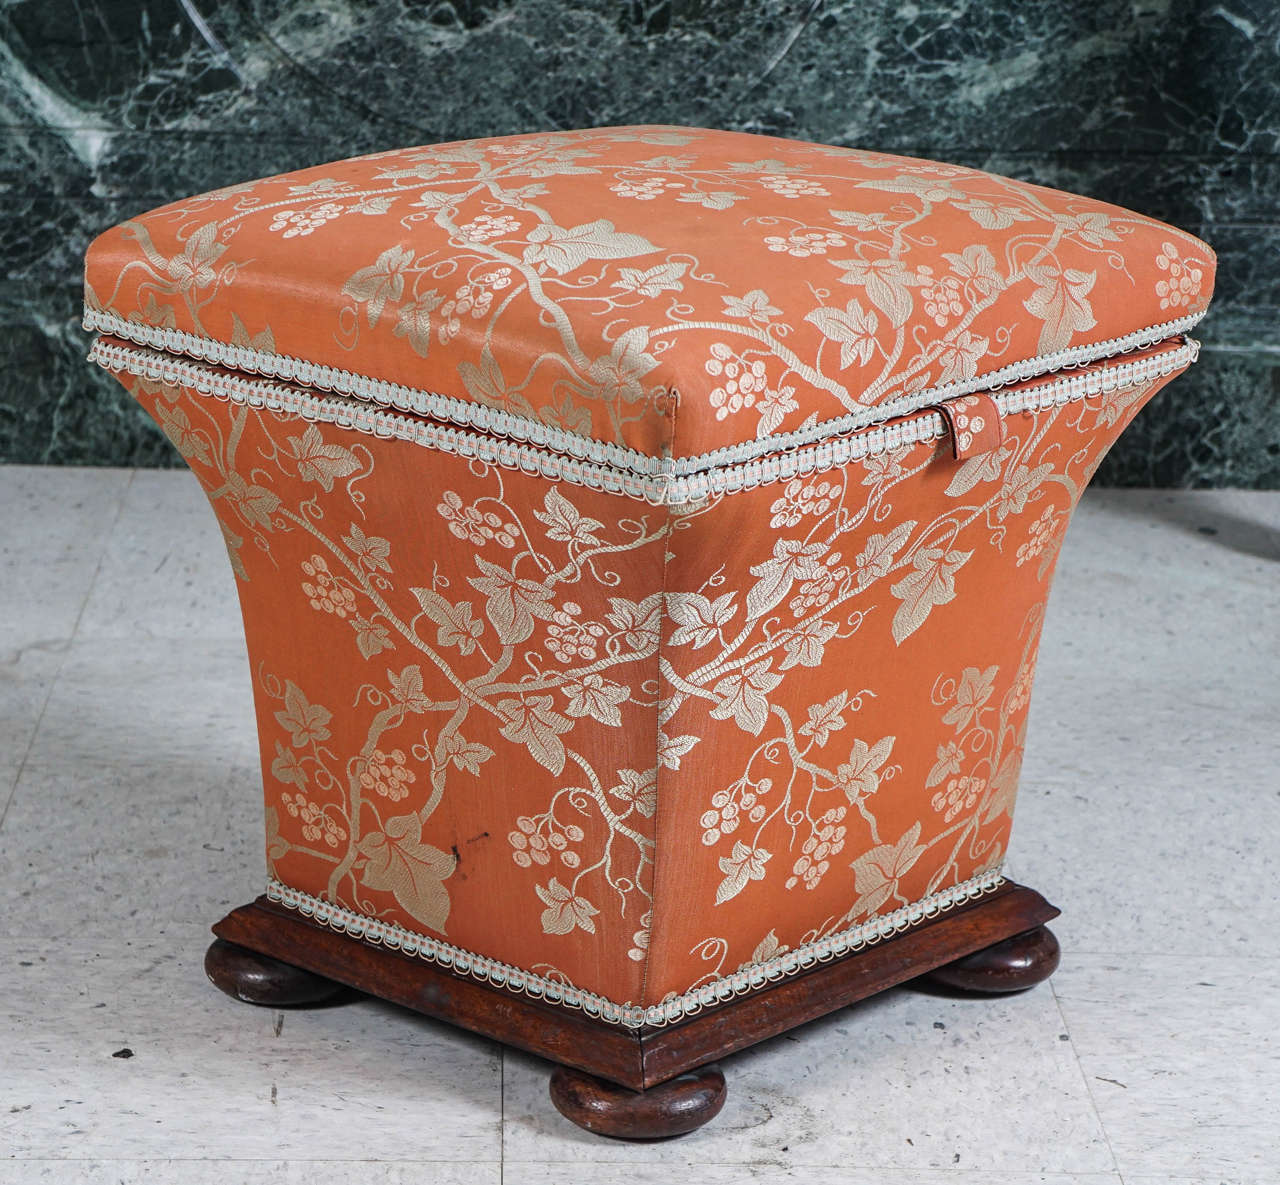 This lovely small storage ottoman was made in England during the mid-1860s The form a common design has been made from the regency period into the mid 19th century and into the early Edwardian period. Crafted from mahogany the piece was always